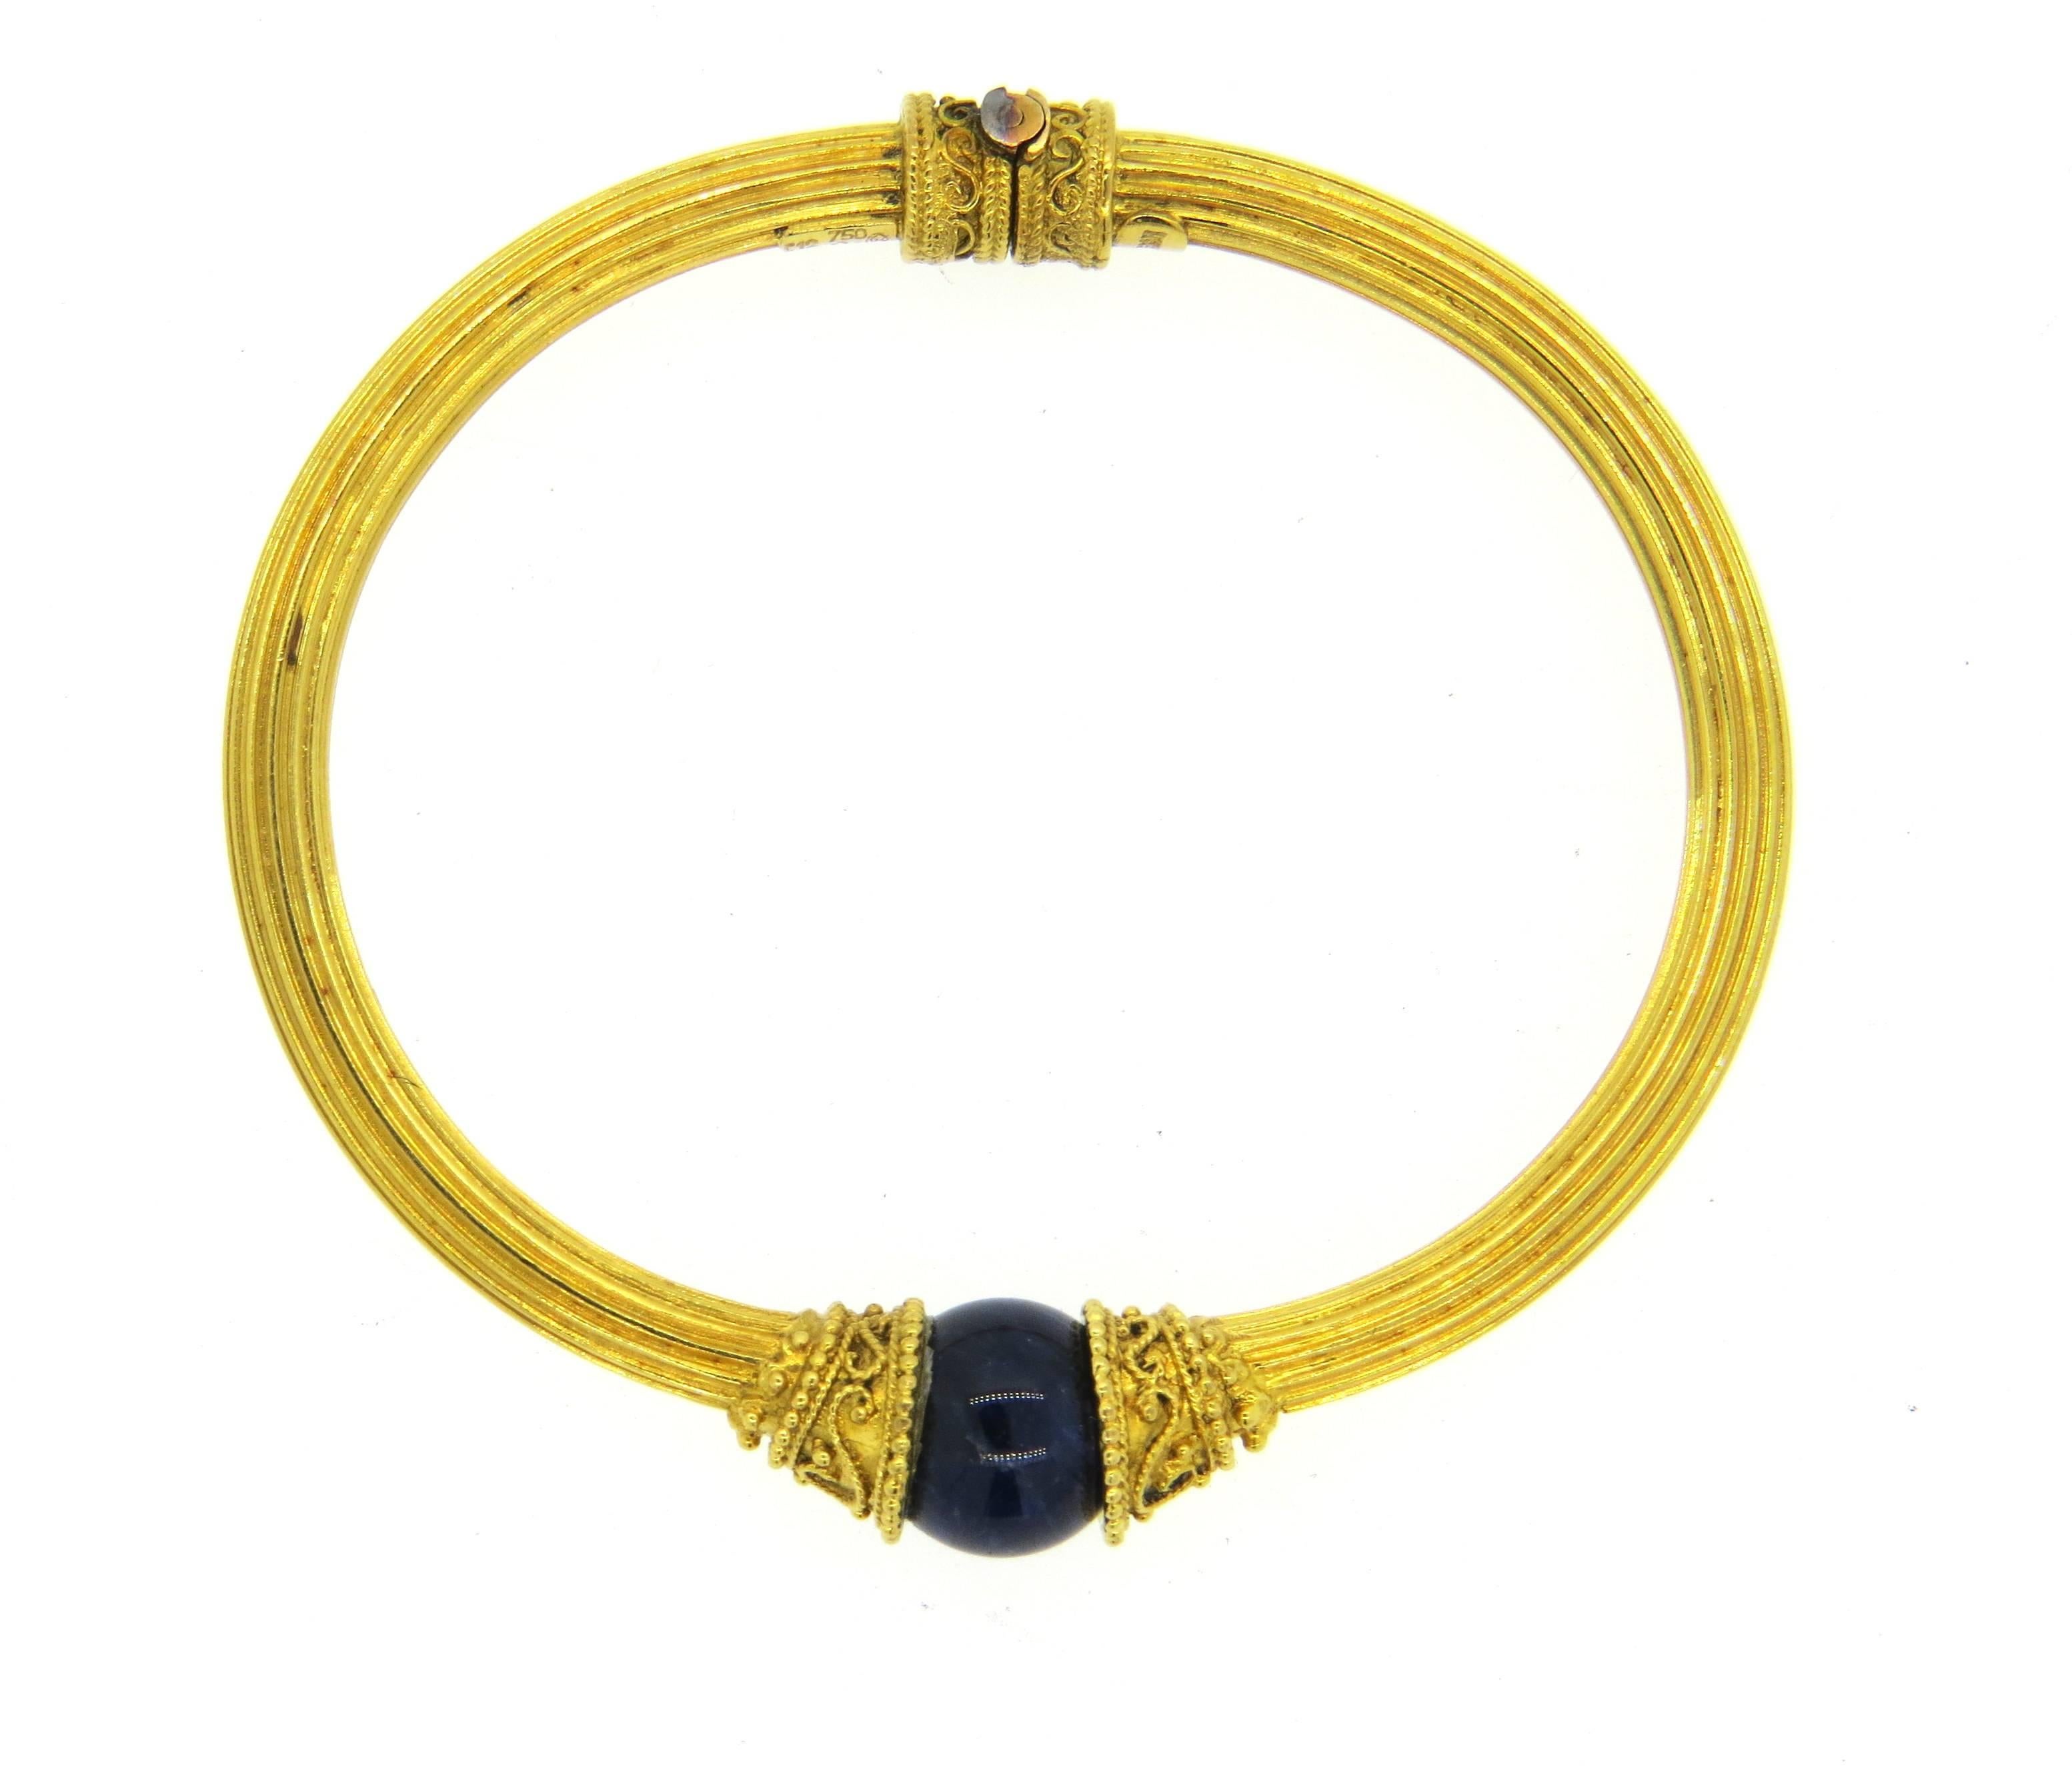 18k yellow gold bangle bracelet, crafted by Ilias Lalaounis, set with  11.2mm lapis ball. Bracelet will comfortably fit up to 7